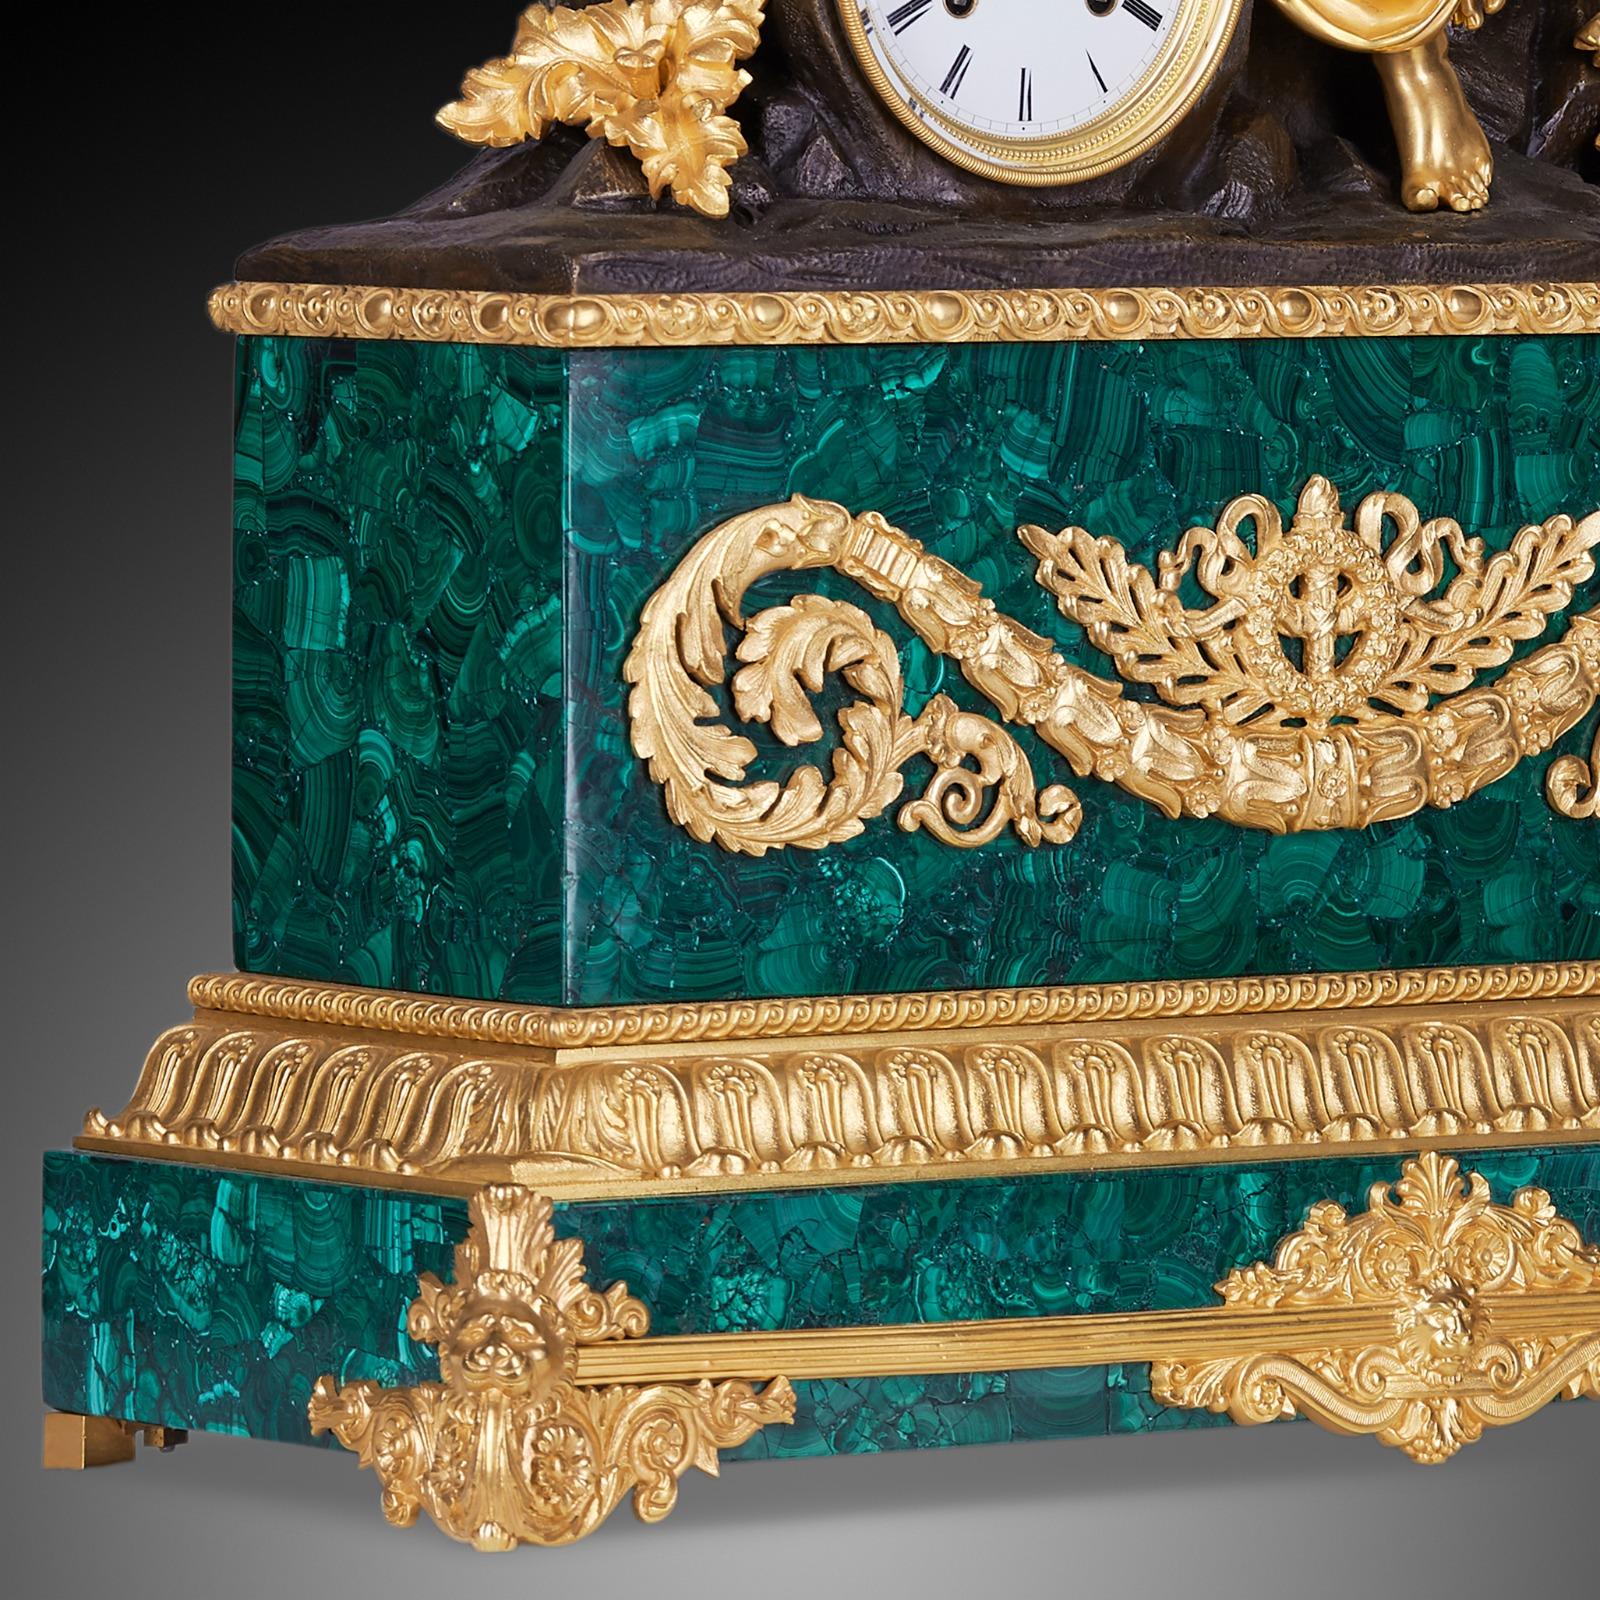 Bronze Mantel Clock 19th Century Louis Philippe Charles X For Sale